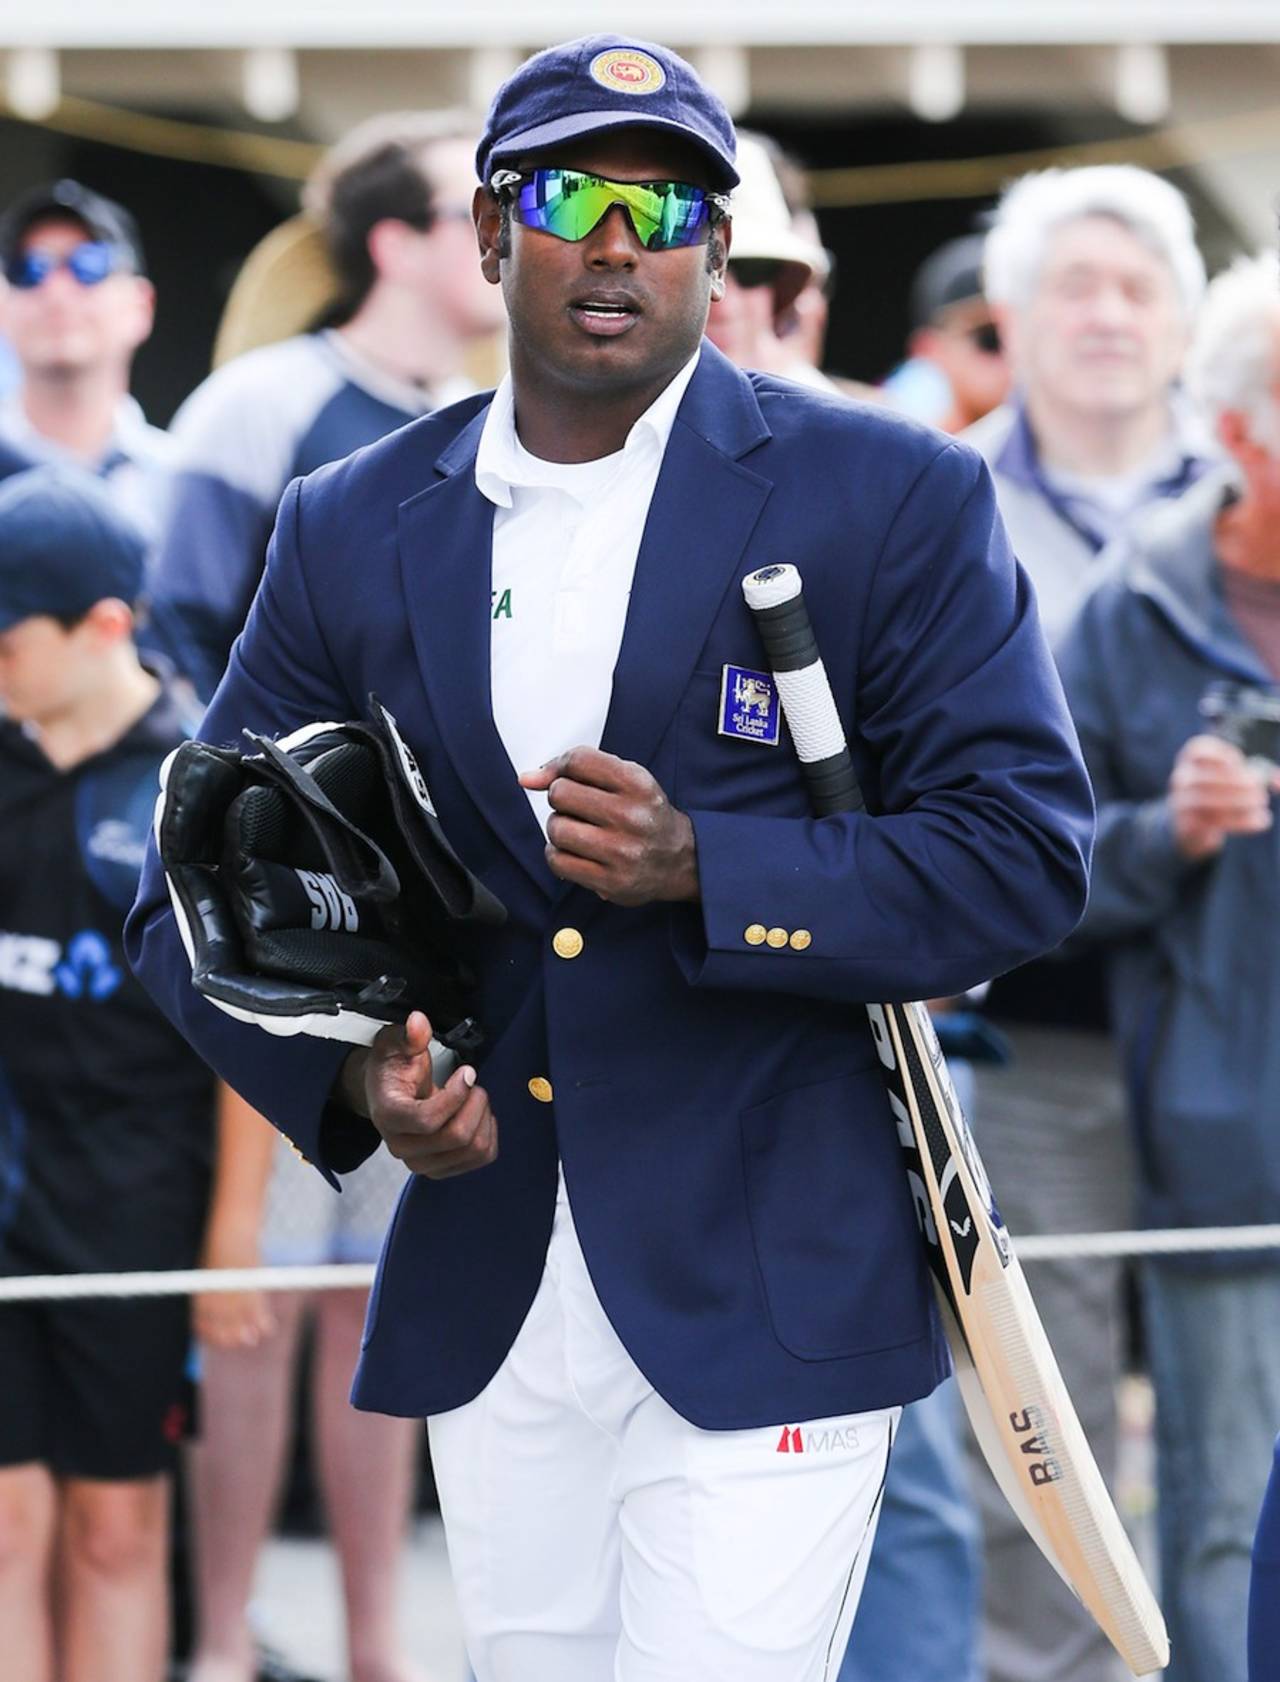 Angelo Mathews narrowly beat Chris Gayle to win the coveted Radioactive Sunglasses of Doom award&nbsp;&nbsp;&bull;&nbsp;&nbsp;Getty Images